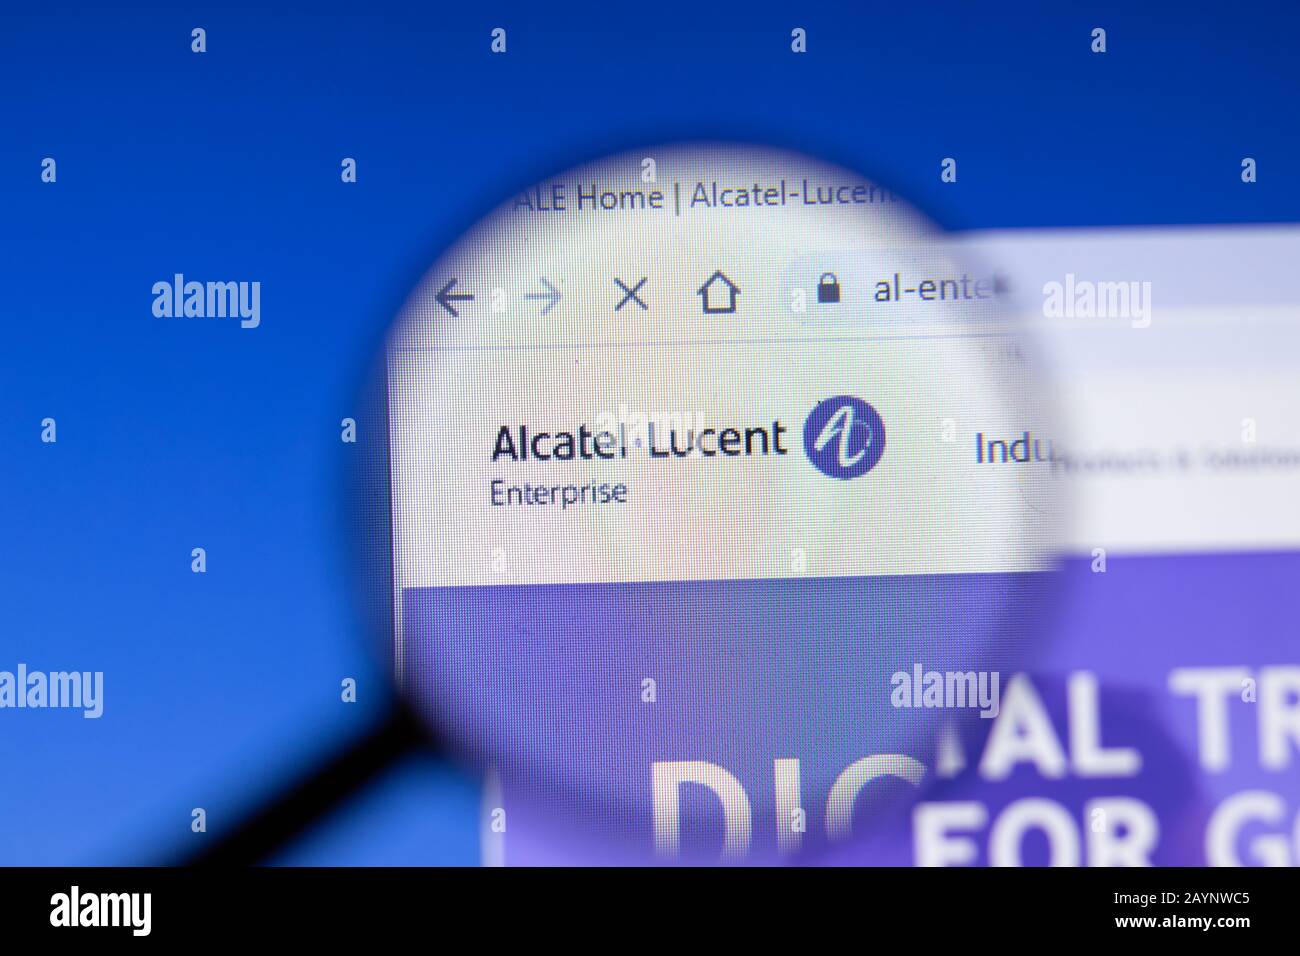 Saint-Petersburg, Russia - 18 February 2020: Alcatel-Lucent company website page logo on laptop display. Screen with icon, Illustrative Editorial Stock Photo